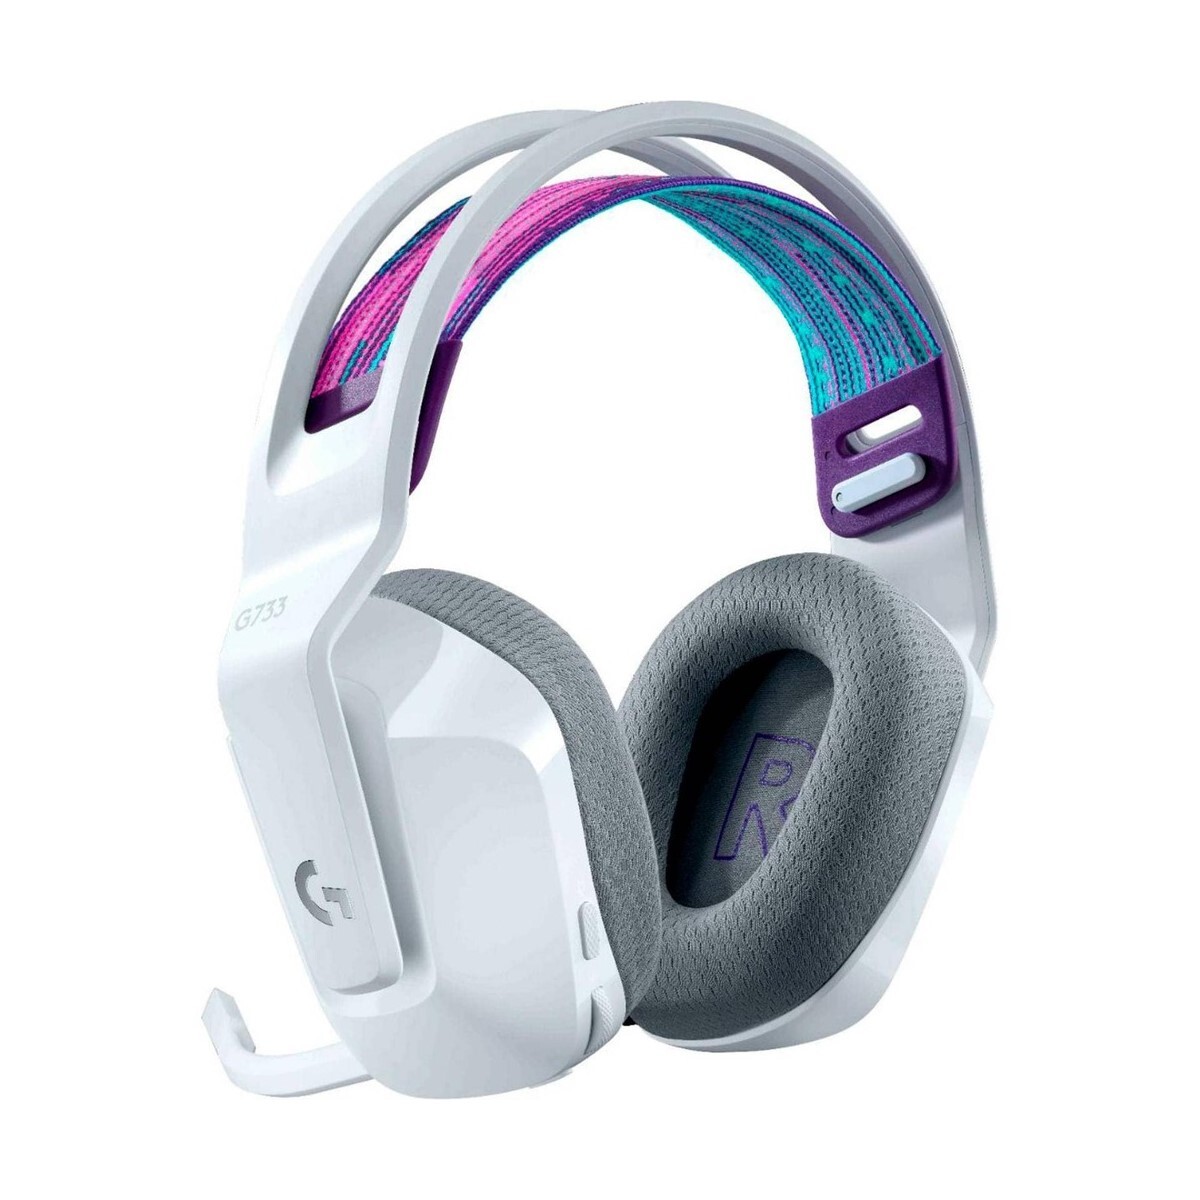 AURICULARES LOGITECH G733 GAMING HEADSET INALÁMBRICOS RGB White